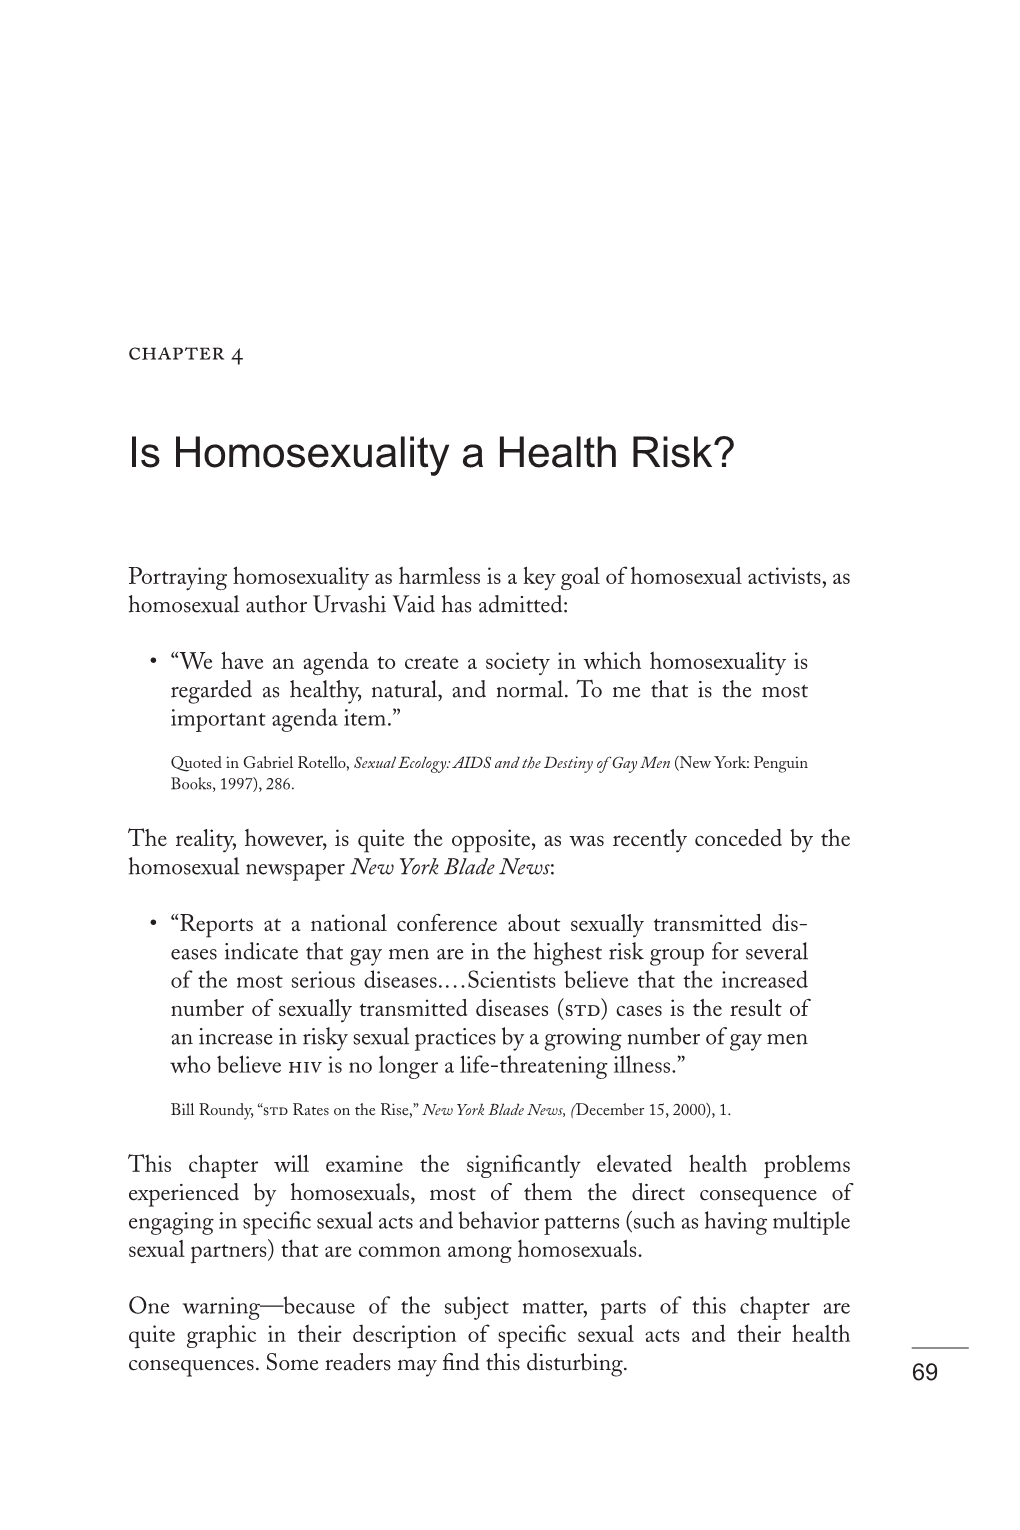 Is Homosexuality a Health Risk?